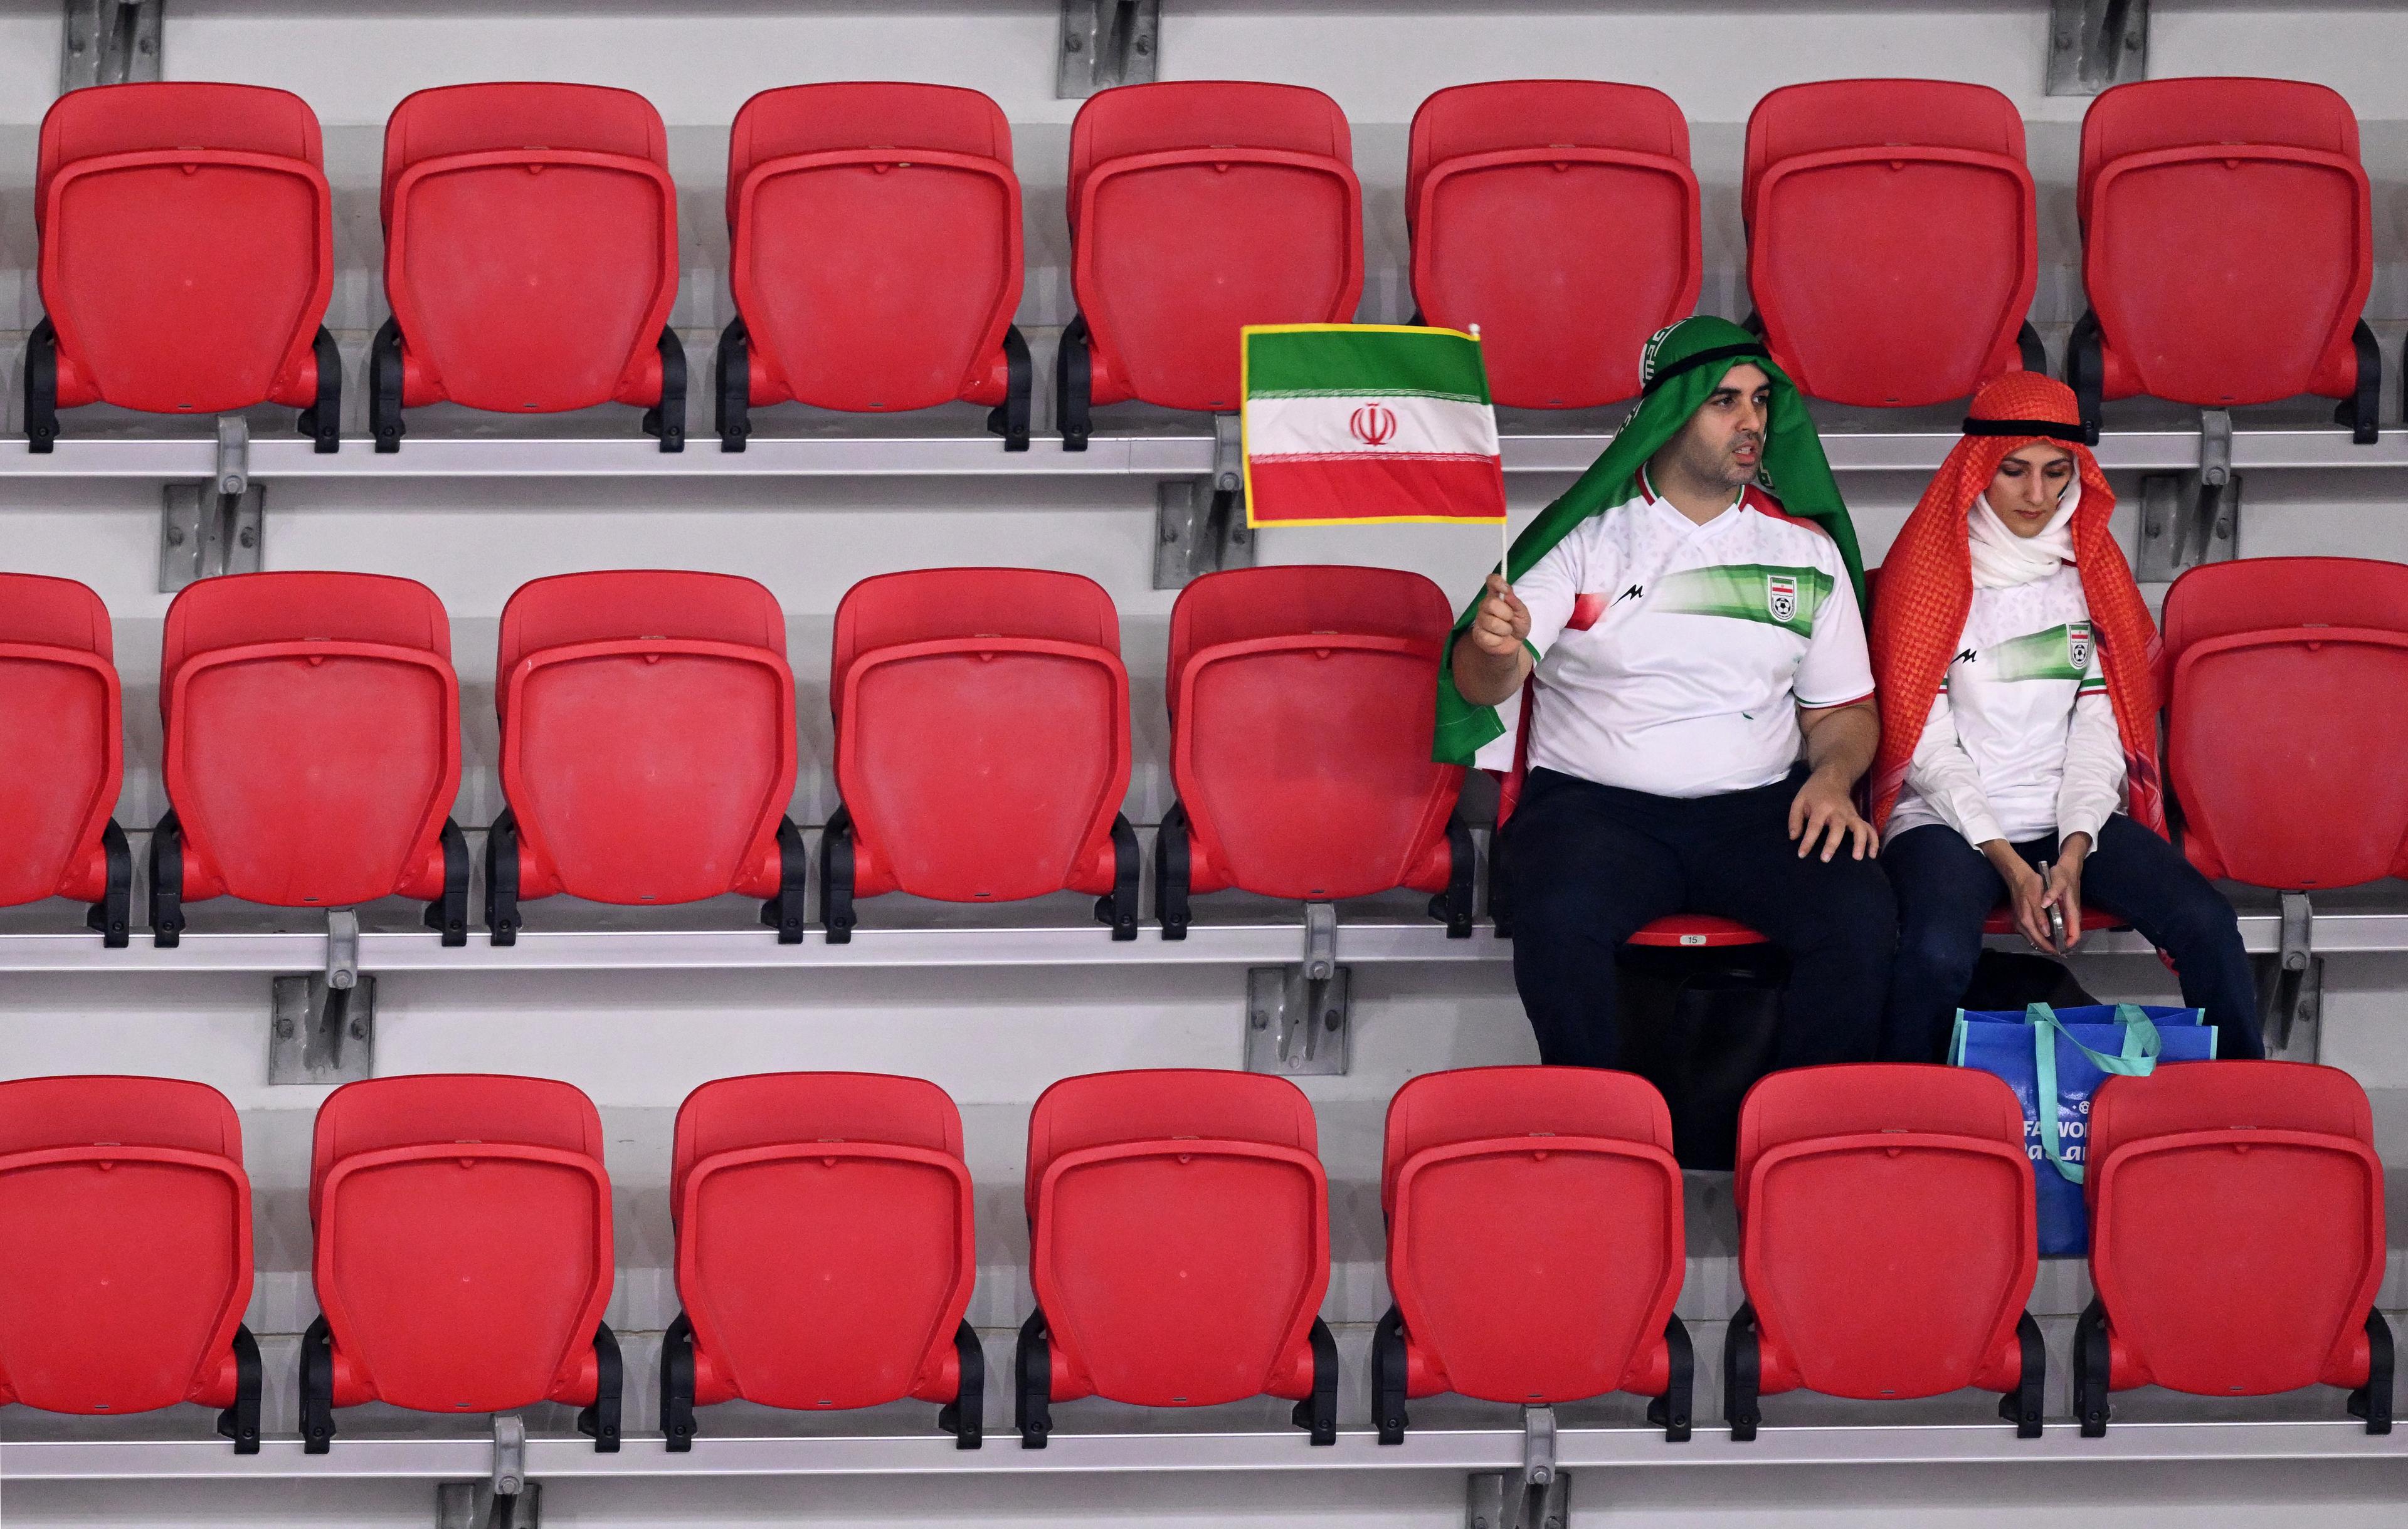 Iran fans wave an Iranian flag as they wait in their seats for kick off ahead of the Qatar 2022 World Cup Group B football match between Iran and USA at the Al-Thumama Stadium in Doha on November 29, 2022. (Photo by Kirill KUDRYAVTSEV / AFP)